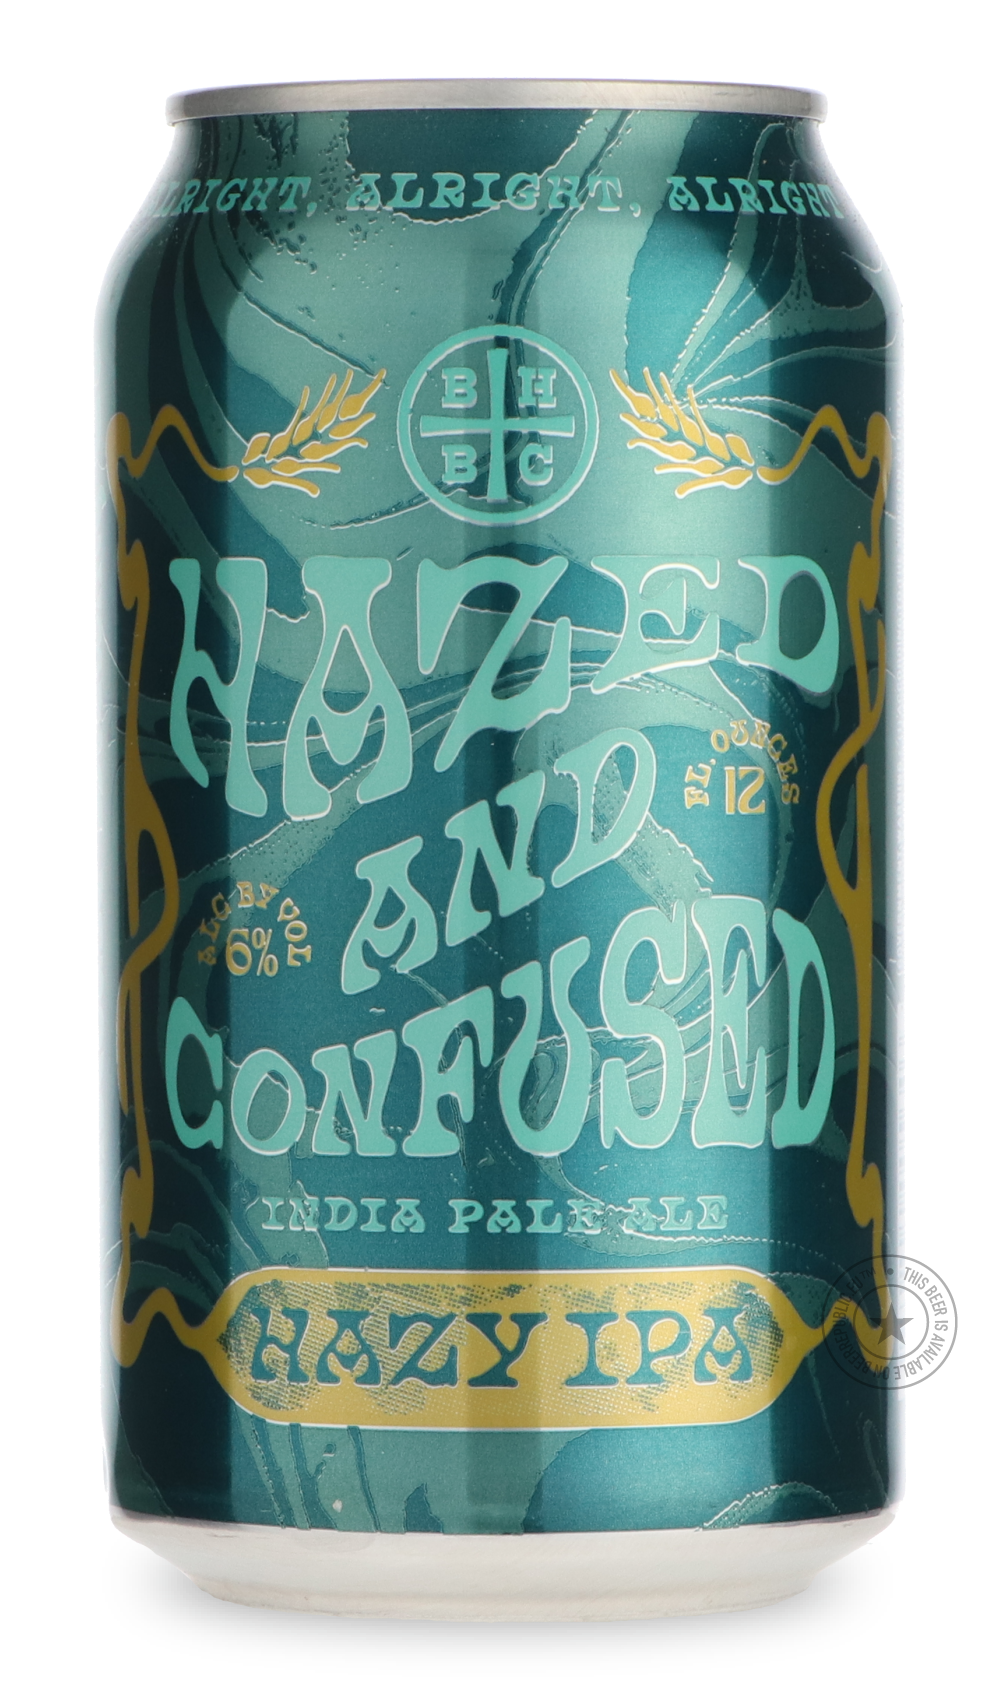 -BarrelHouse- Hazed & Confused-IPA- Only @ Beer Republic - The best online beer store for American & Canadian craft beer - Buy beer online from the USA and Canada - Bier online kopen - Amerikaans bier kopen - Craft beer store - Craft beer kopen - Amerikanisch bier kaufen - Bier online kaufen - Acheter biere online - IPA - Stout - Porter - New England IPA - Hazy IPA - Imperial Stout - Barrel Aged - Barrel Aged Imperial Stout - Brown - Dark beer - Blond - Blonde - Pilsner - Lager - Wheat - Weizen - Amber - Ba